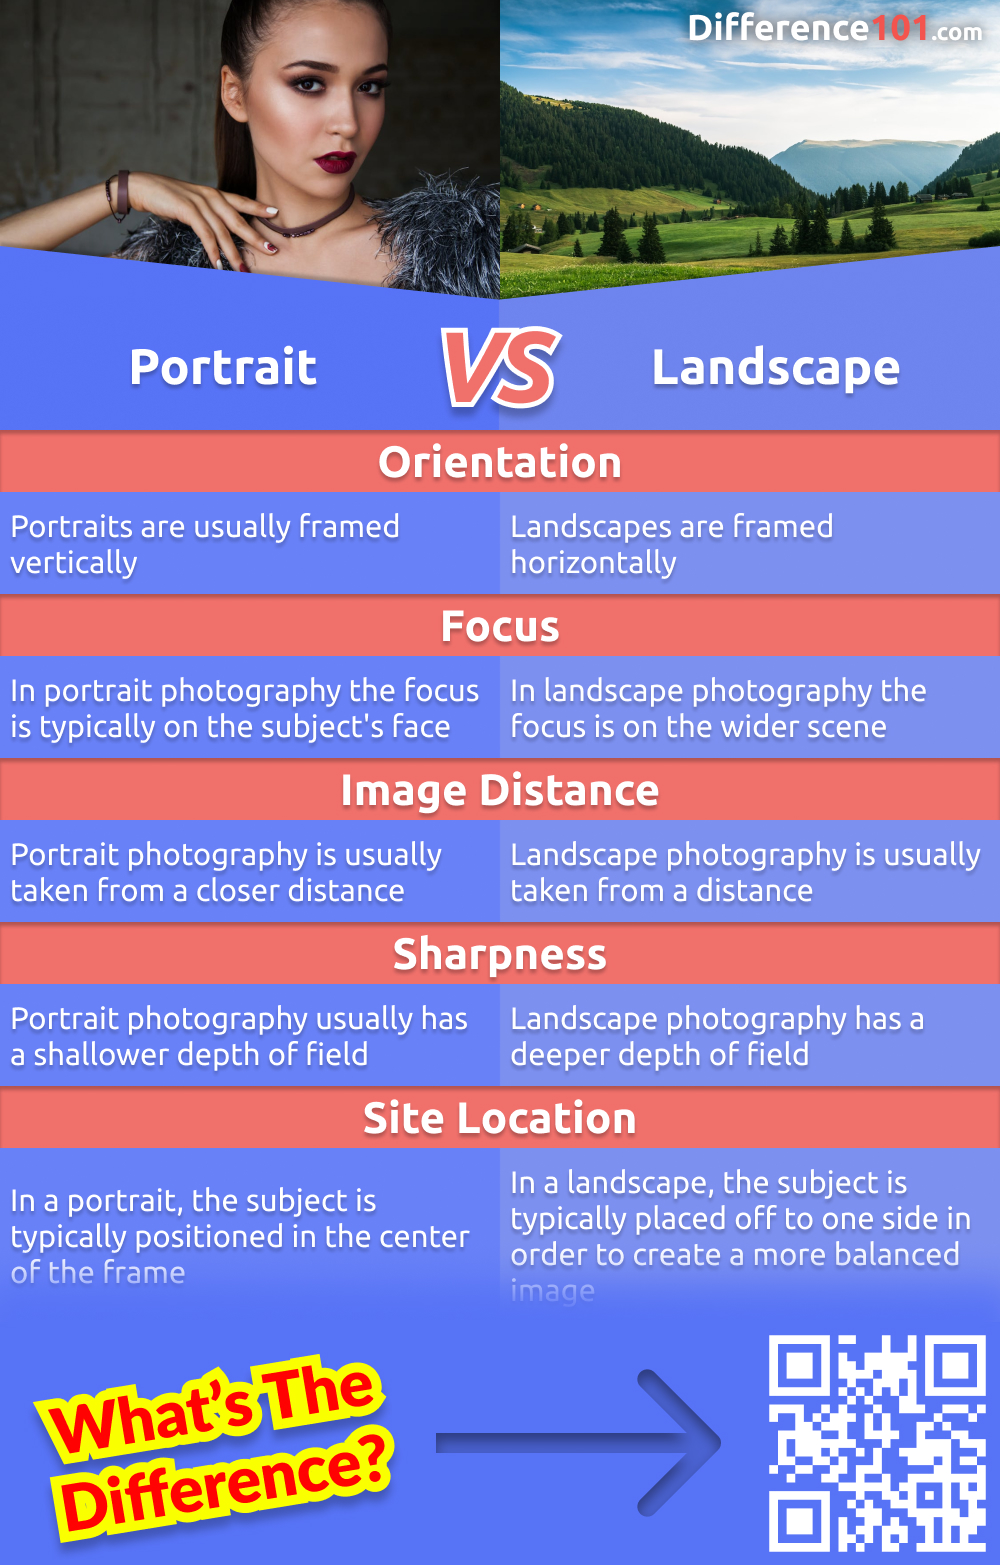 Portraits and landscapes are two orientations for art and photography. But which one should you use? Read more to find out the difference between portrait and landscape orientation and when to use each one.